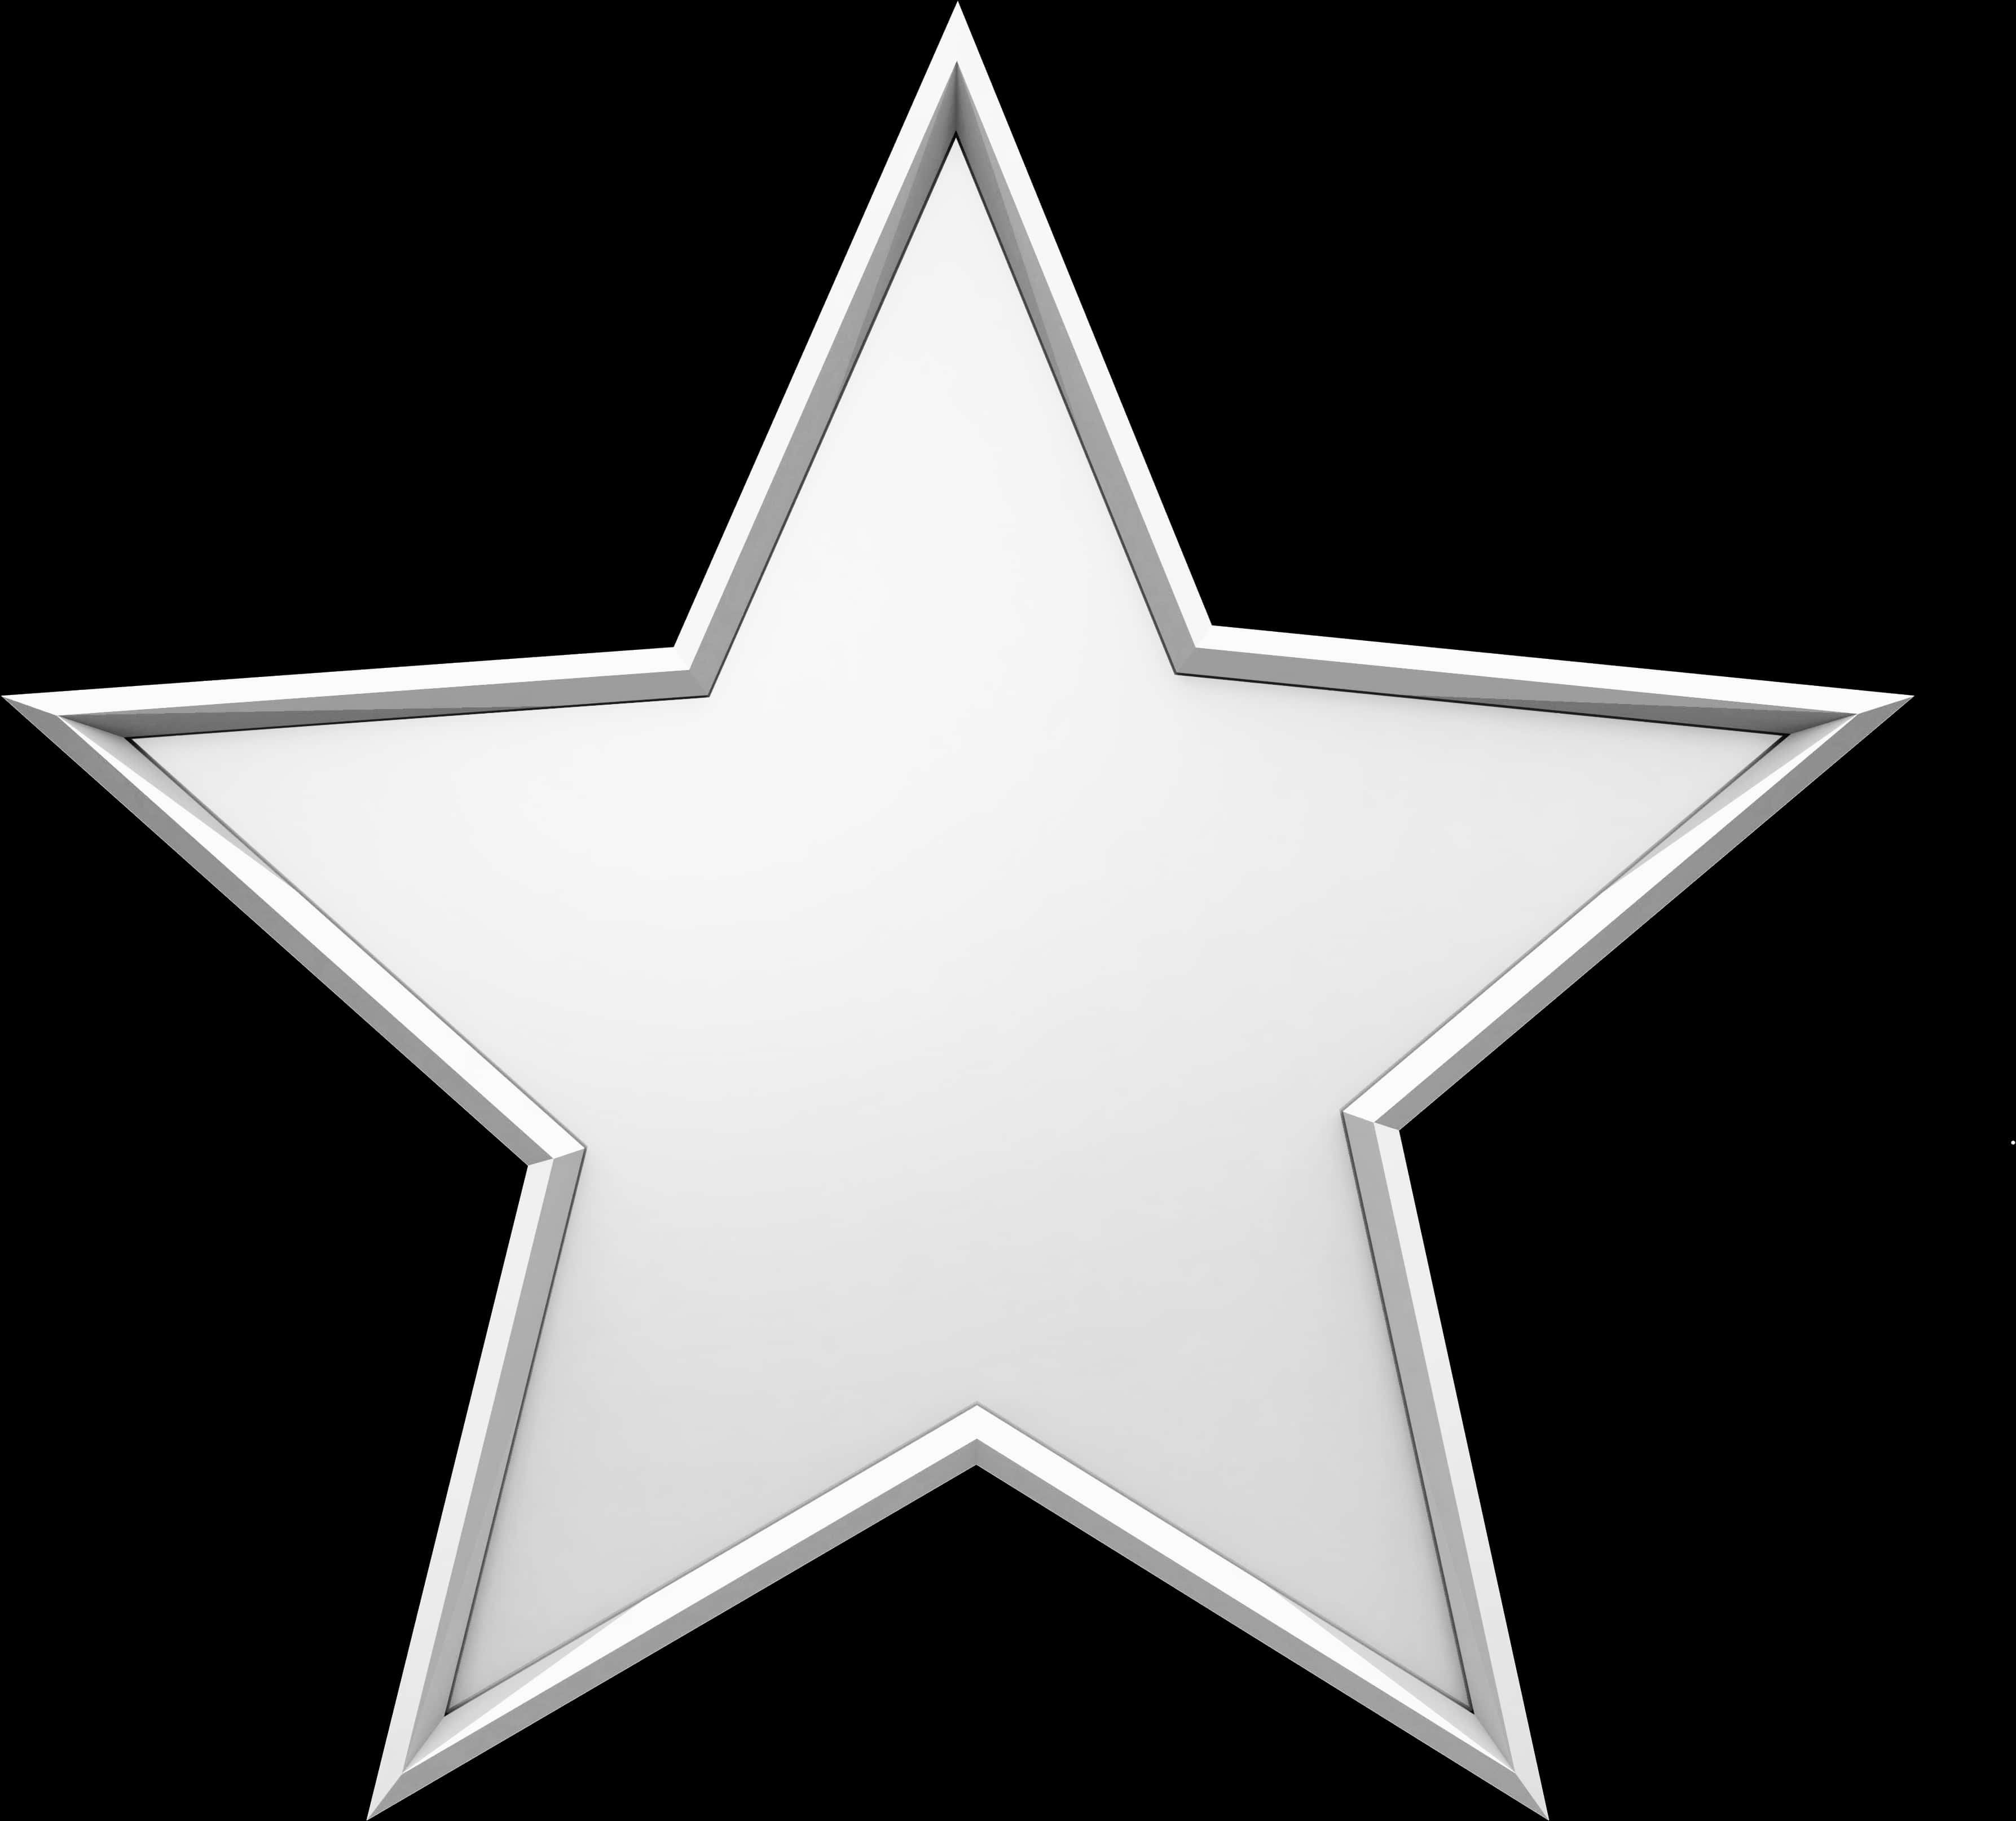 White Star Graphic Design PNG image